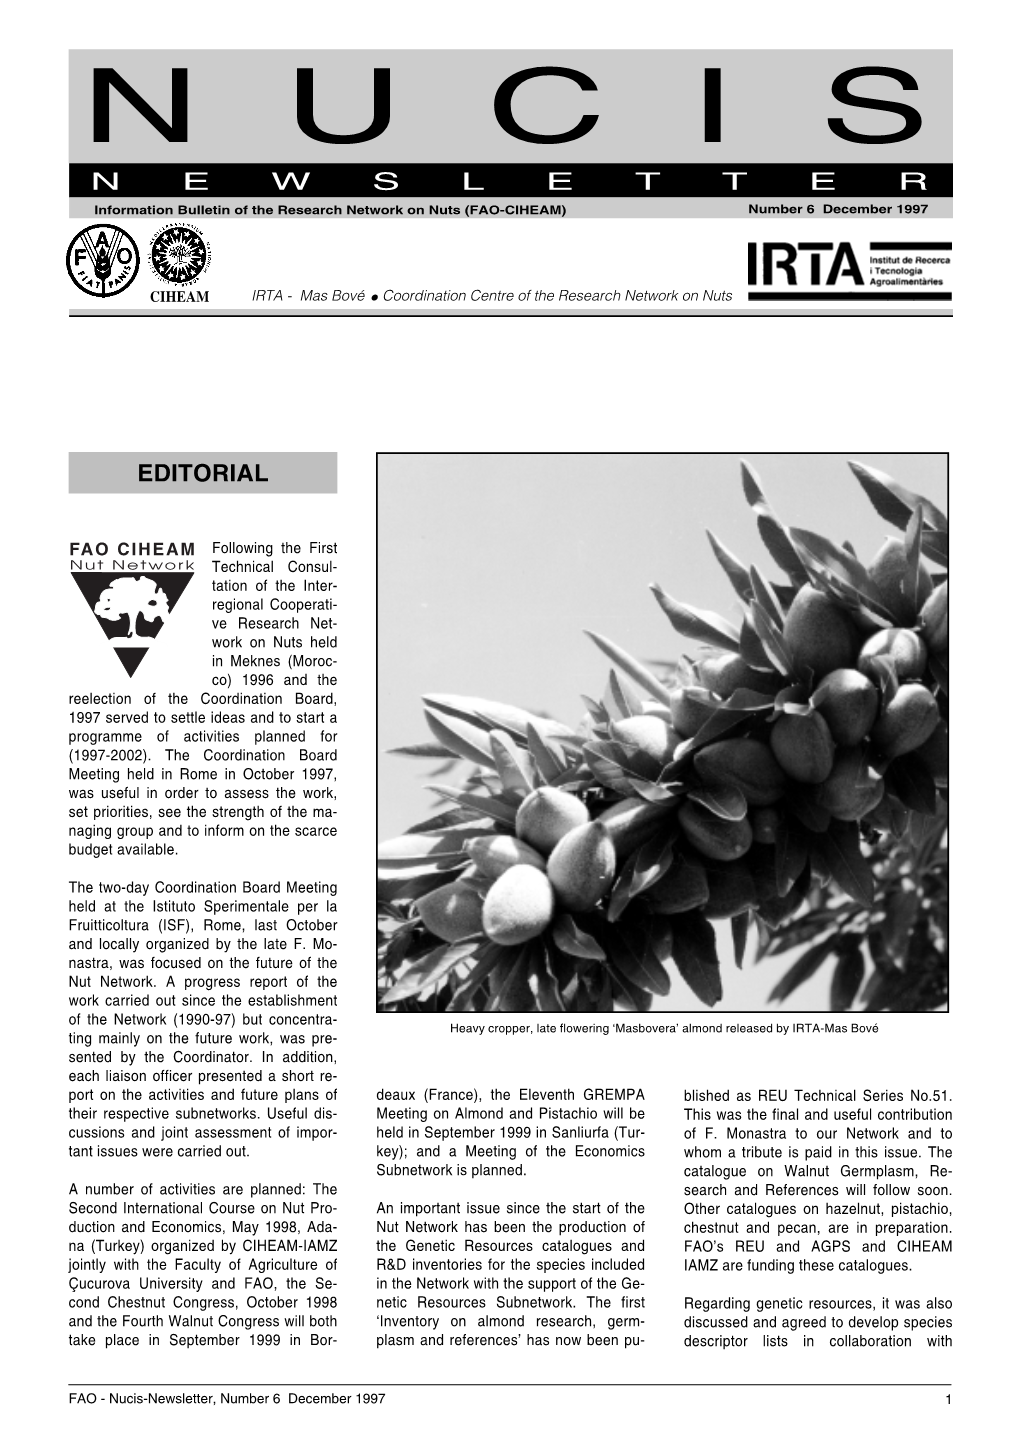 NUCIS NEWSLETTER Information Bulletin of the Research Network on Nuts (FAO-CIHEAM) Number 6 December 1997